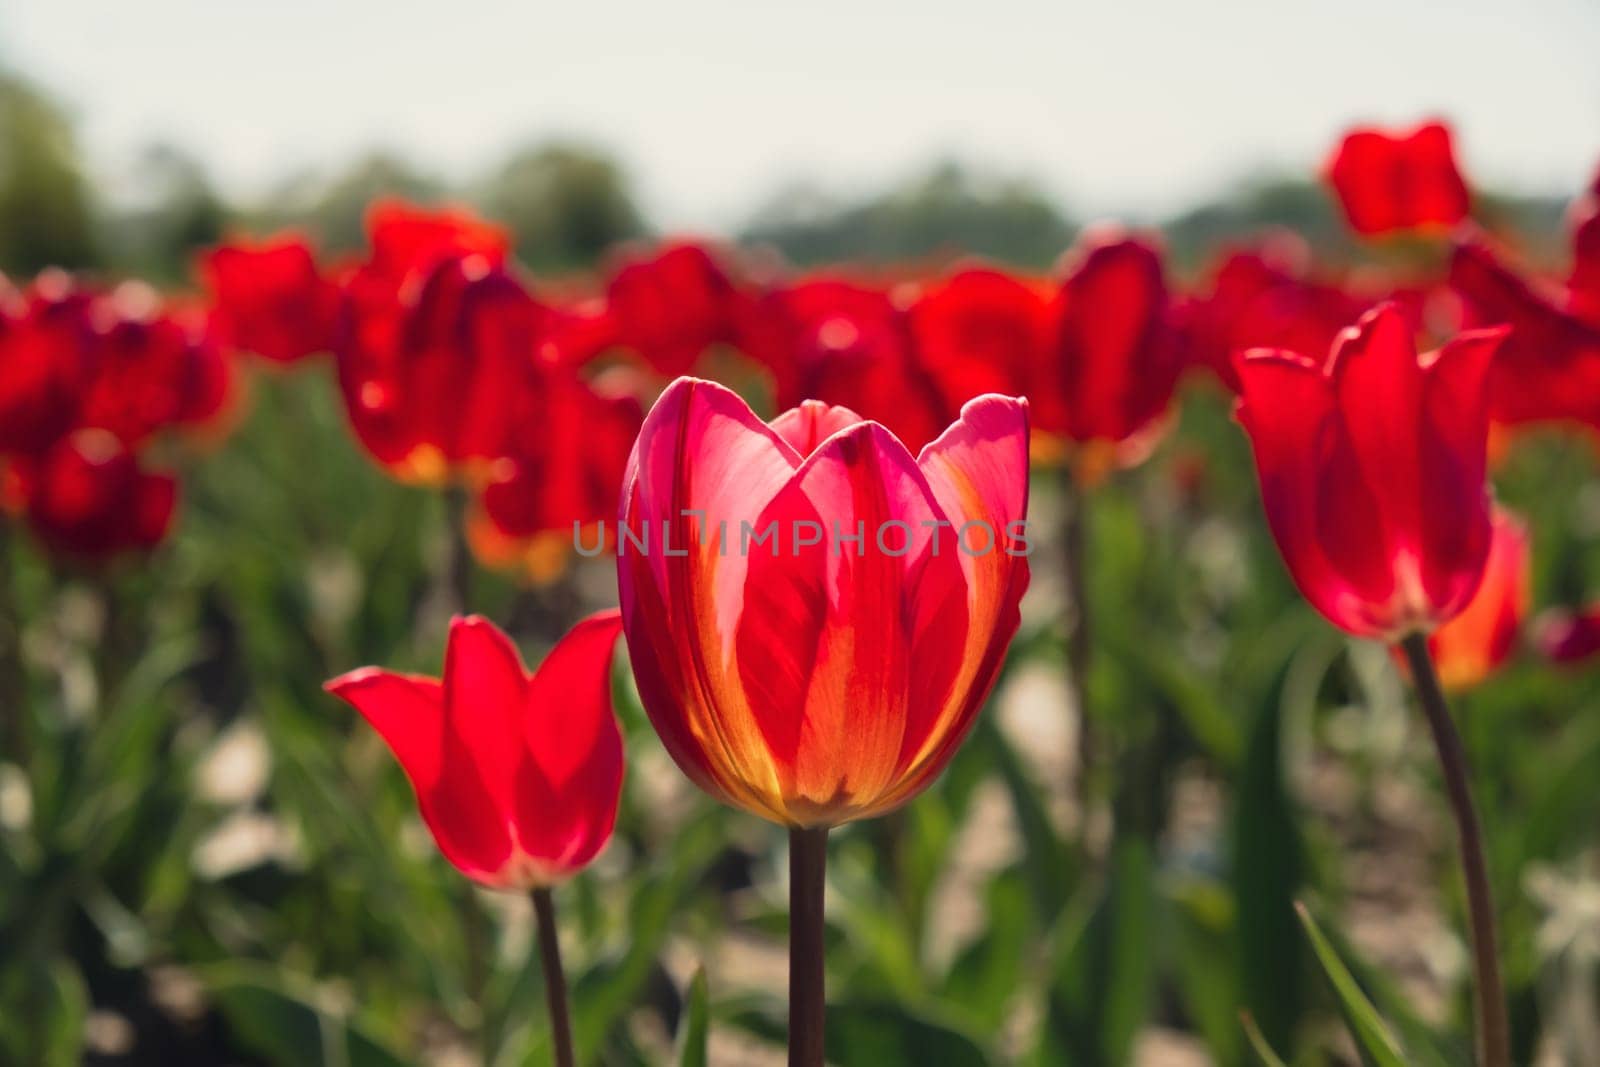 Pink Tulip flowers blooming in the garden field landscape. Beautiful spring garden with many red tulips outdoors. Blooming floral park in sunrise light. Stripped tulips growing in flourish meadow sunny day Keukenhof. Natural floral pattern by anna_stasiia